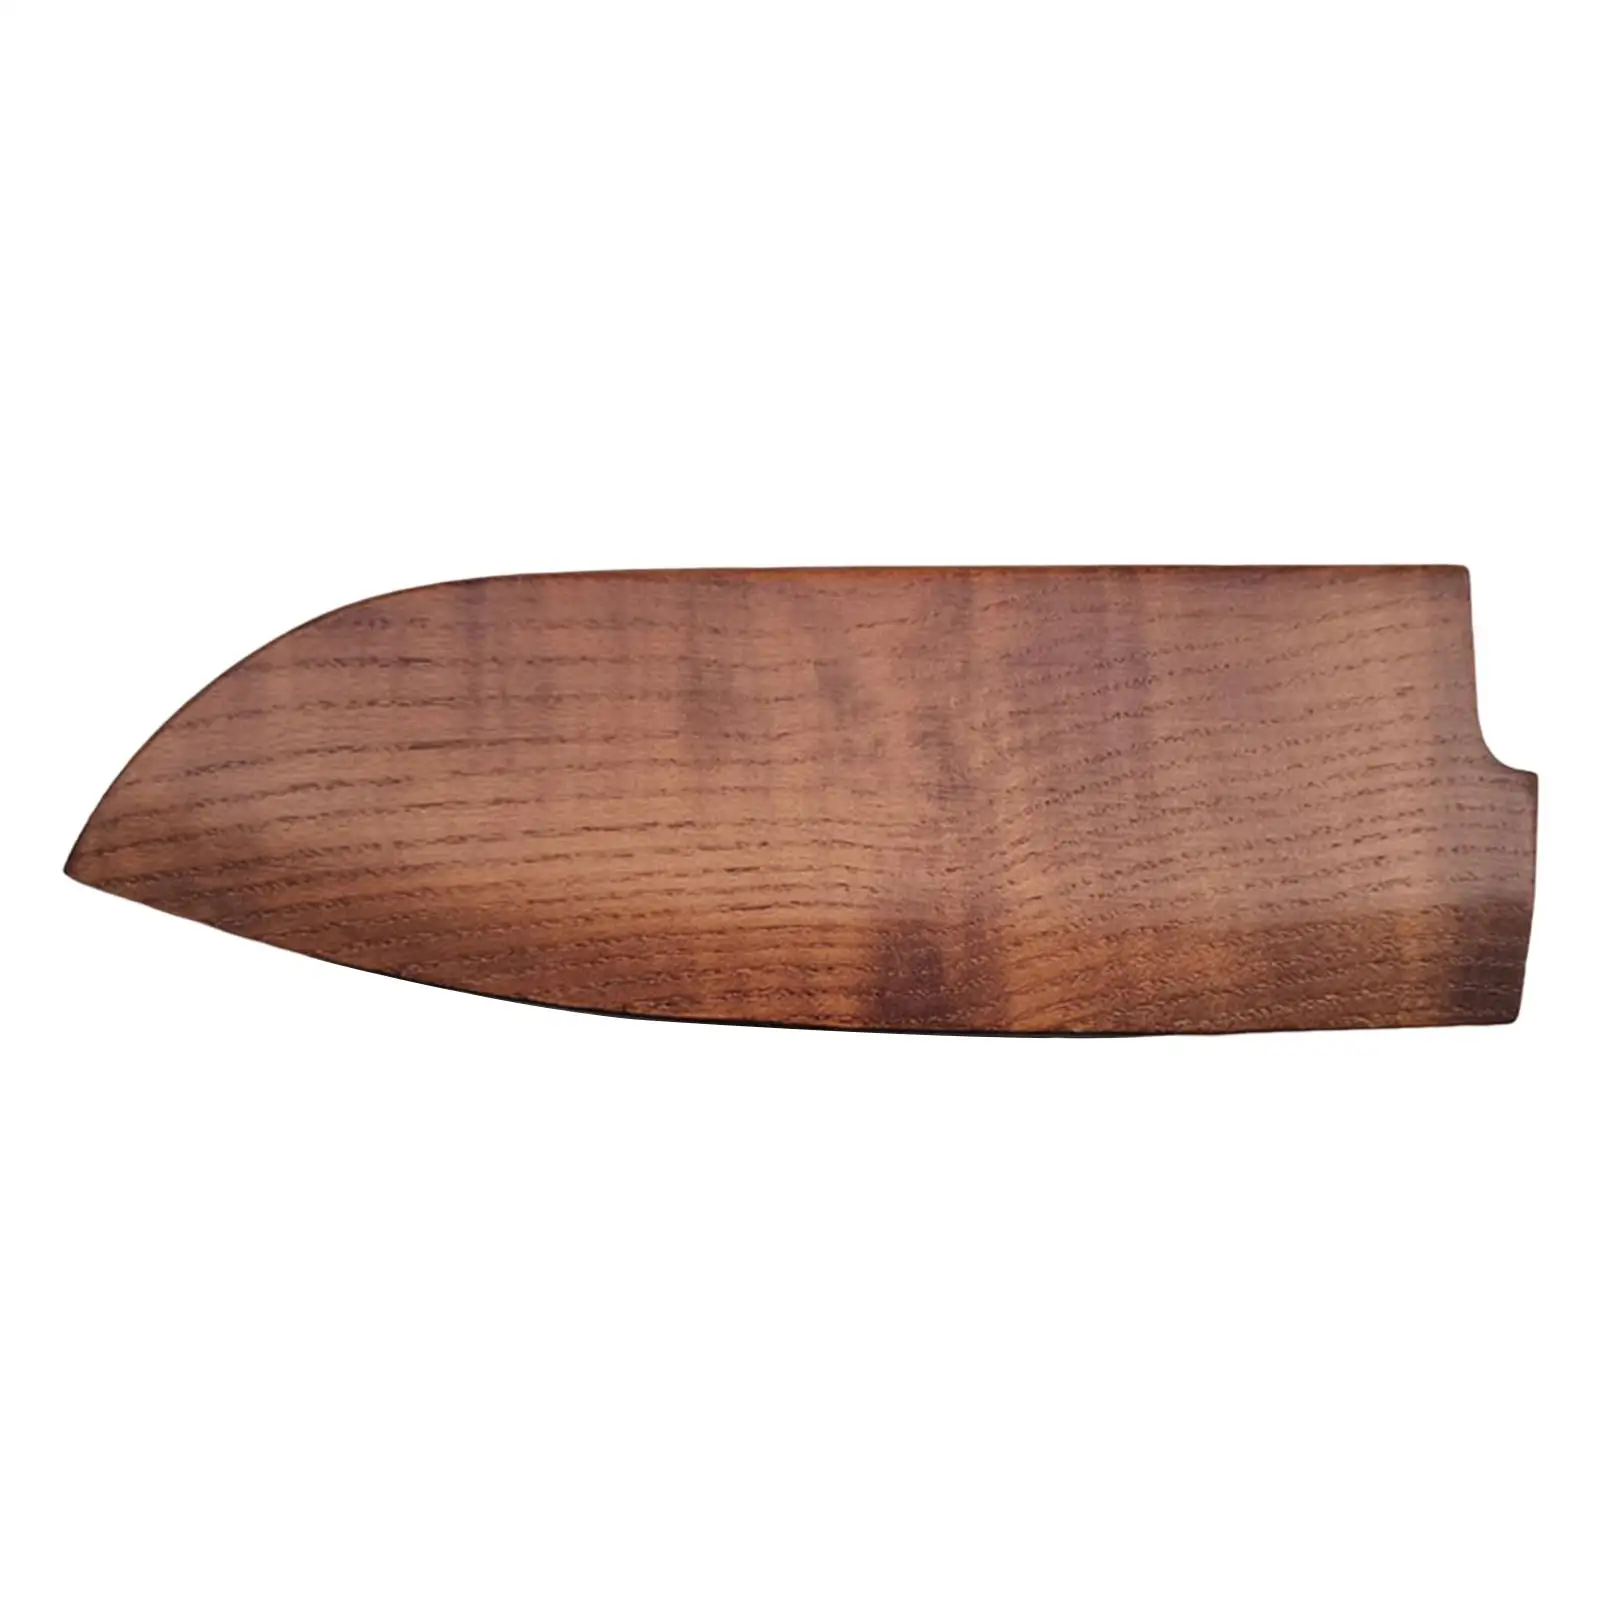 Knife Scabbard Blade Cover Case Wooden Knife Cover for Chef Outdoor Camping